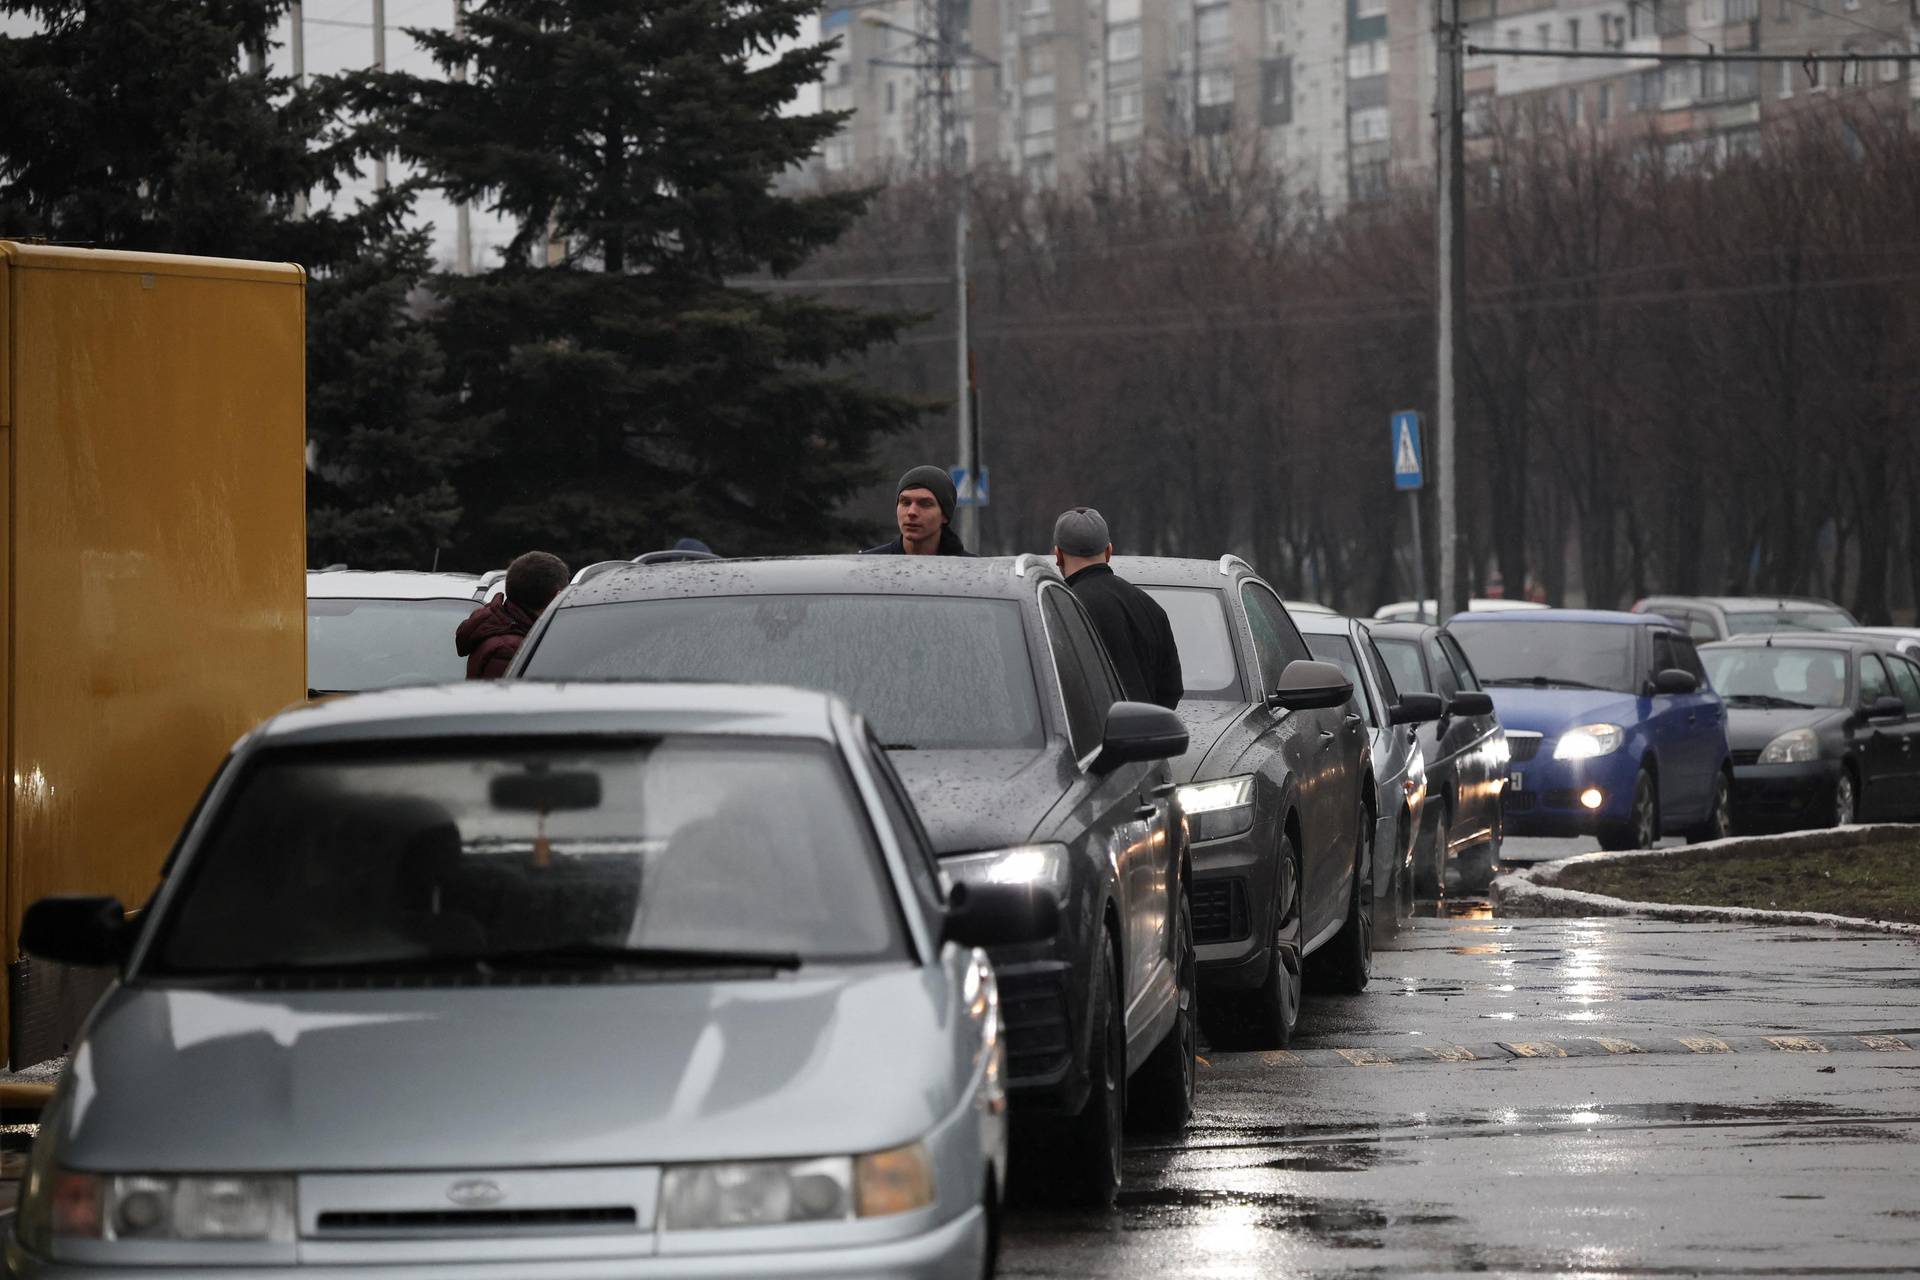 People in cars queue getting ready to leave the city, after Russian President Vladimir Putin authorized military operation in eastern Ukraine, in Mariupol